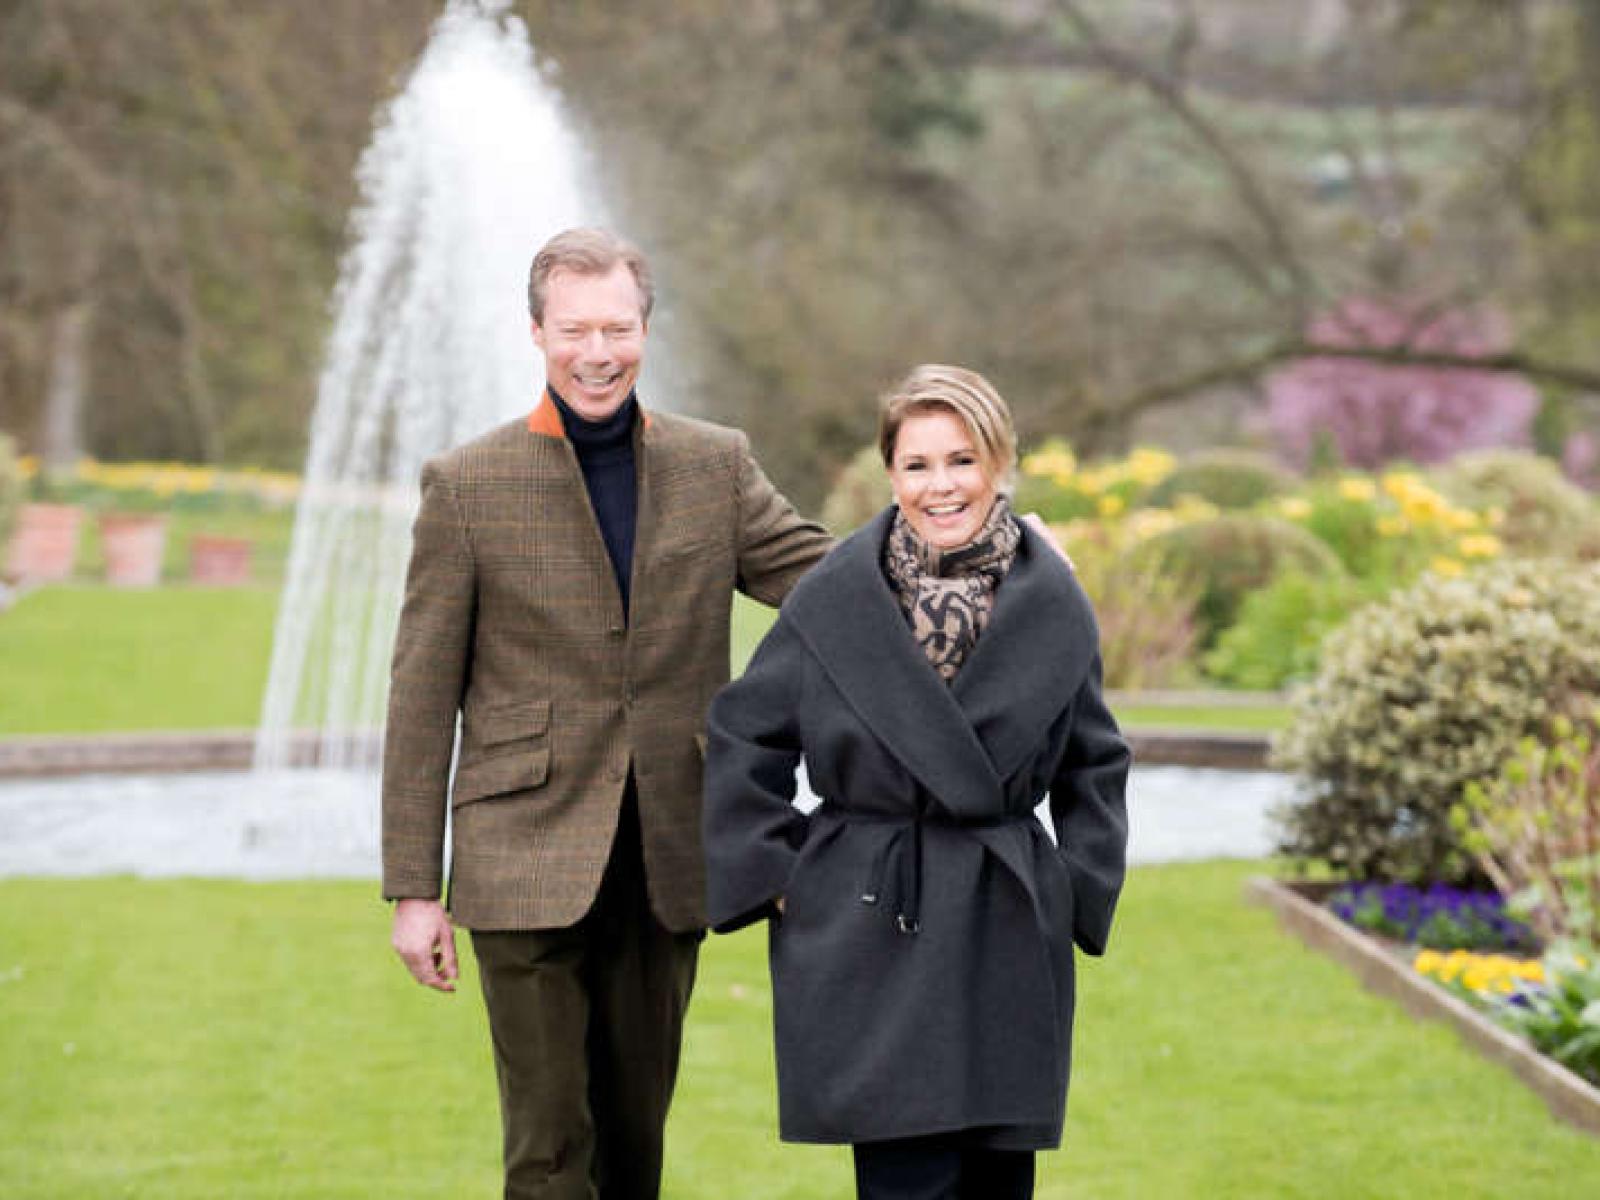 The Grand Ducal Couple takes a walk in the garden